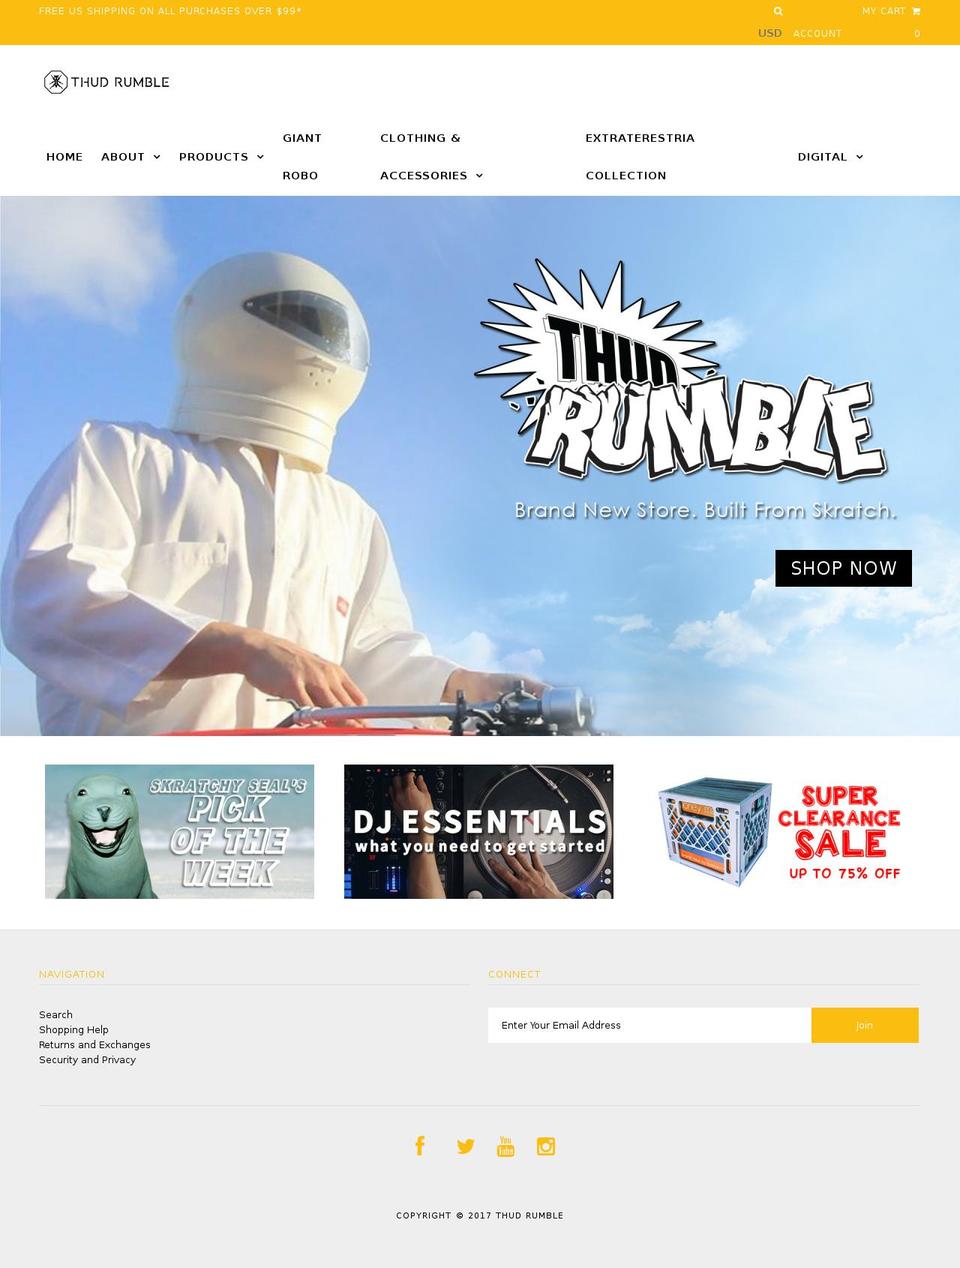 Icon Shopify theme site example thudrumble.com